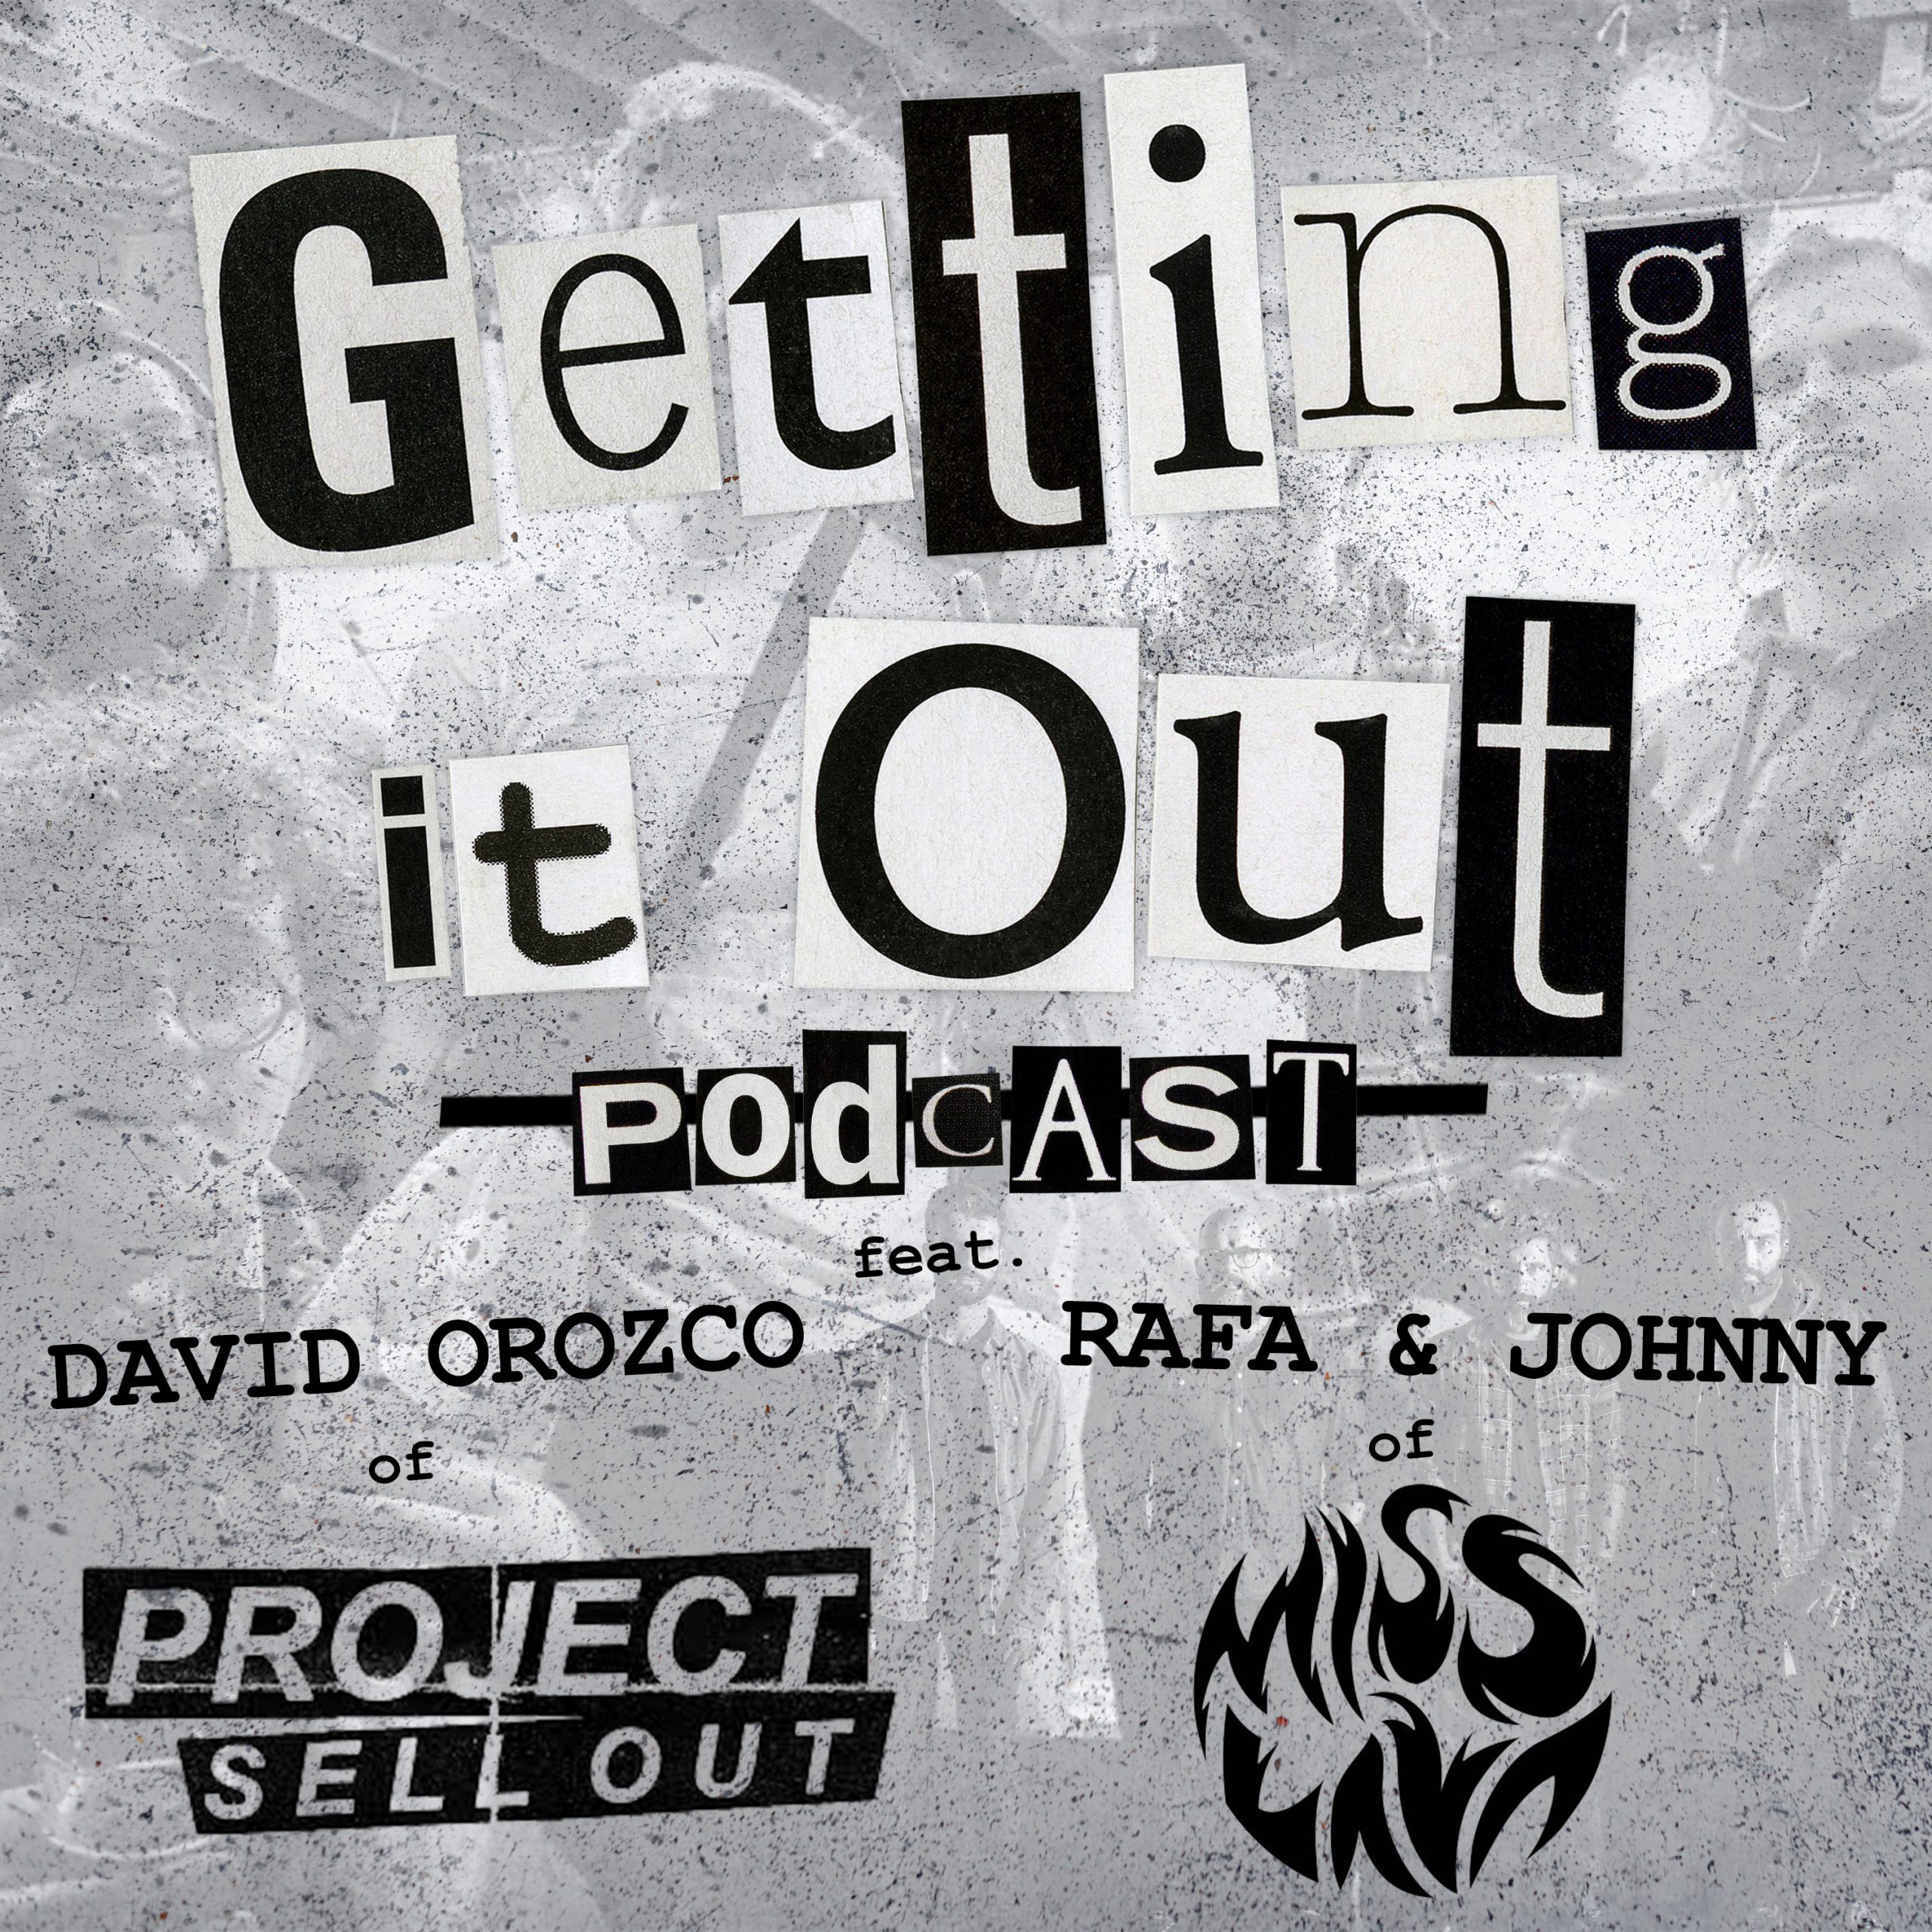 Episode 161 (Project Sell Out & Miss Lava)